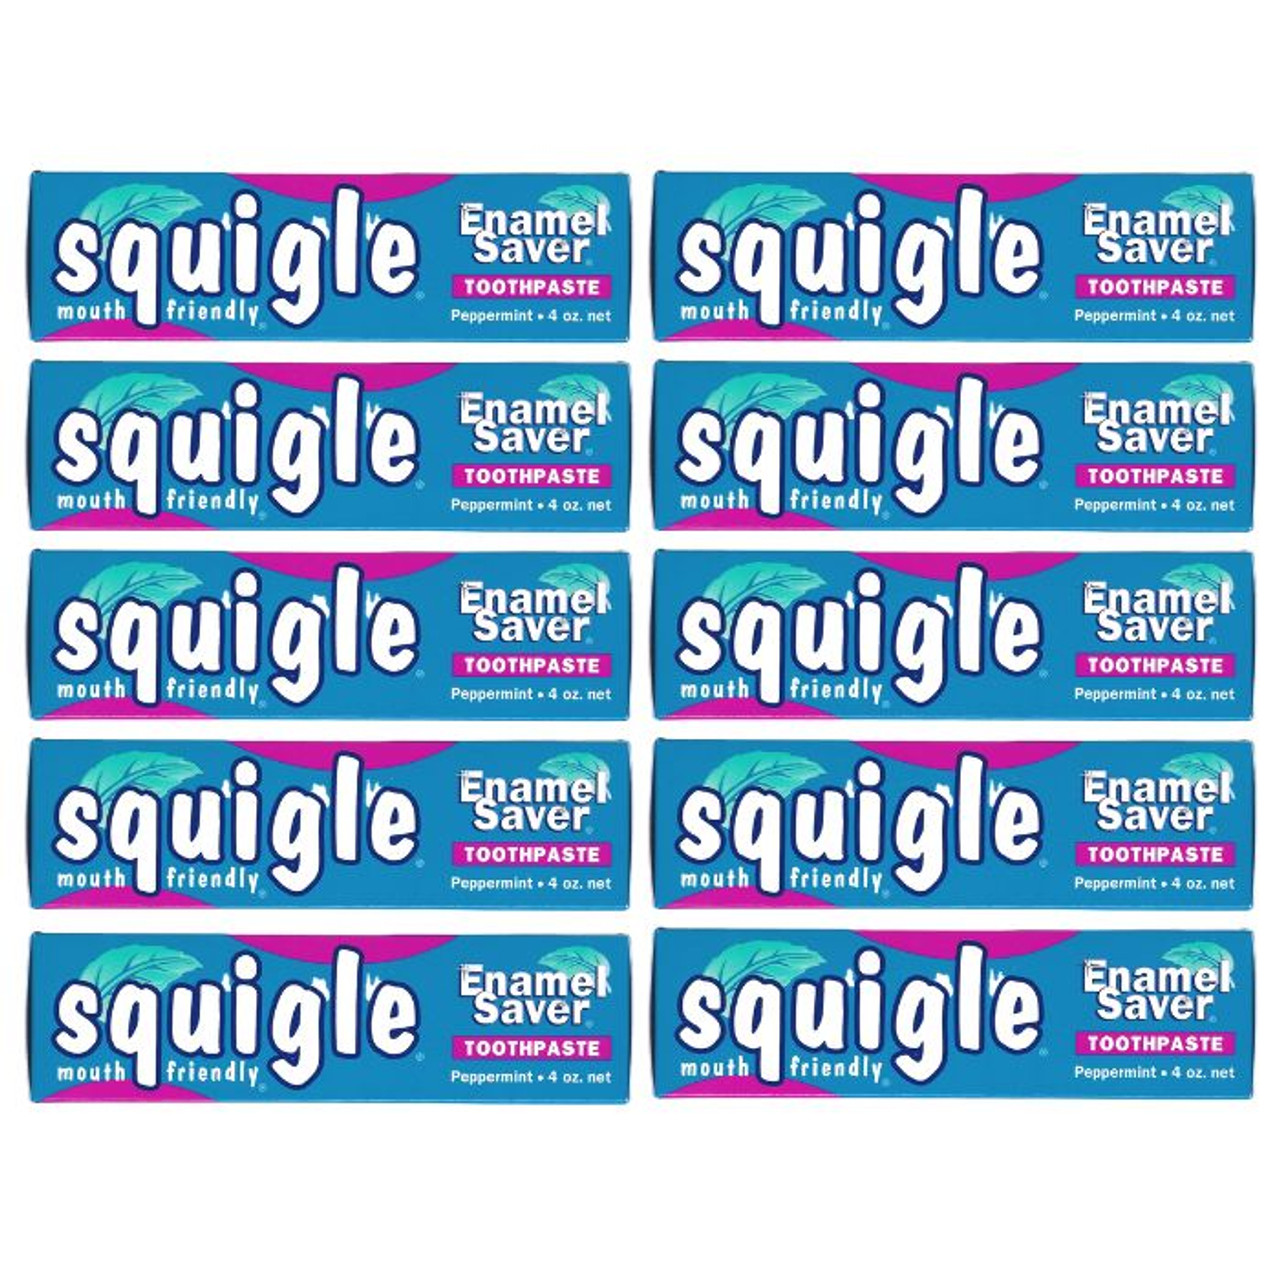 Squigle Enamel Saver Toothpaste with Xylitol and FLUORIDE - 4 oz tubes -  Made in the USA